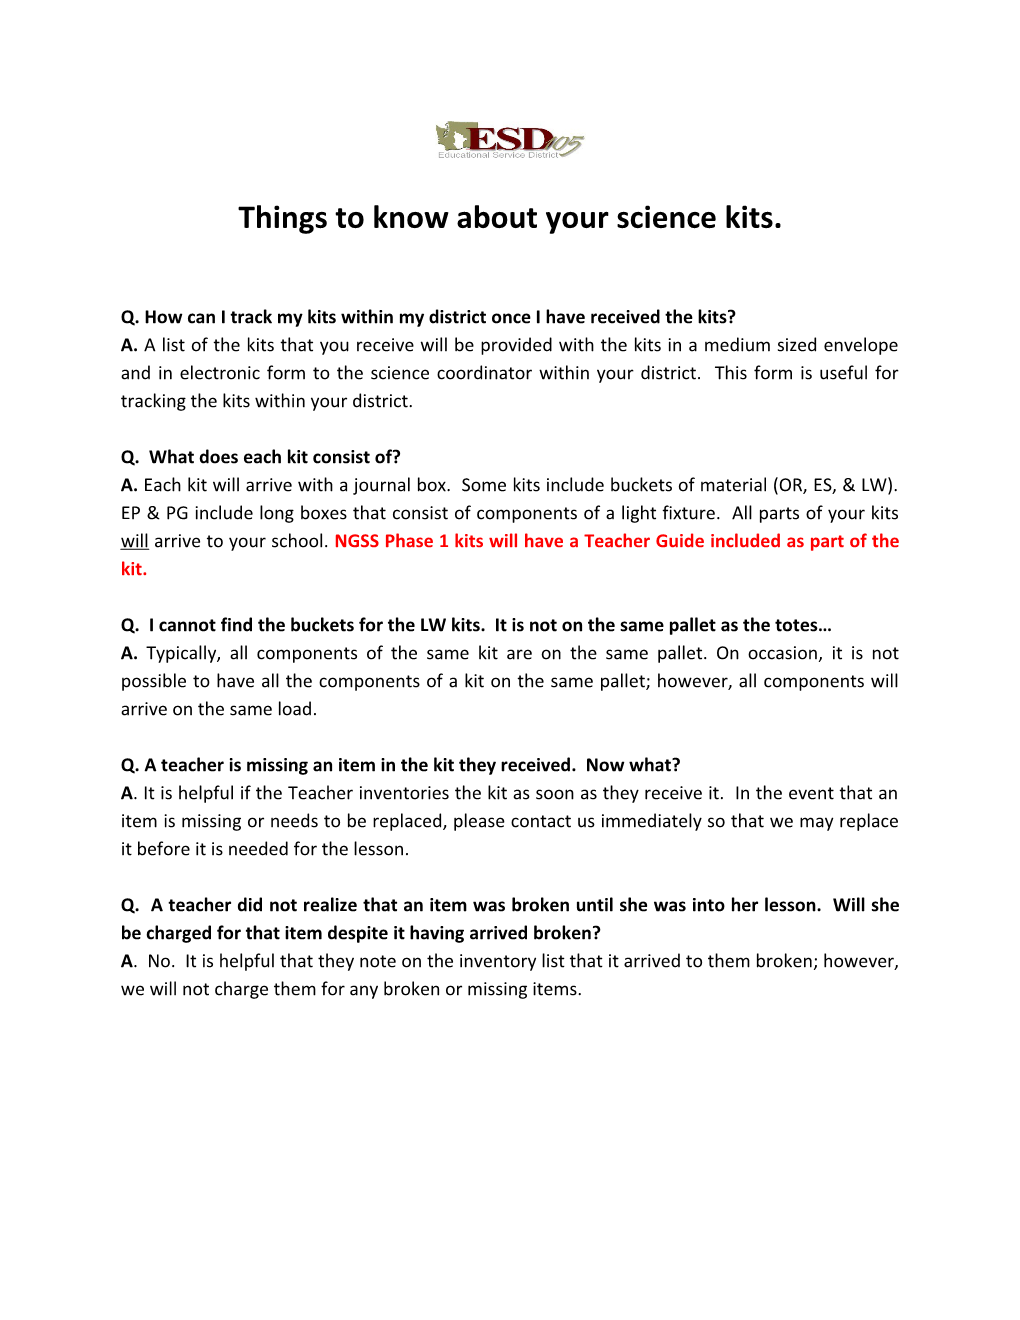 Things to Know About Your Science Kits